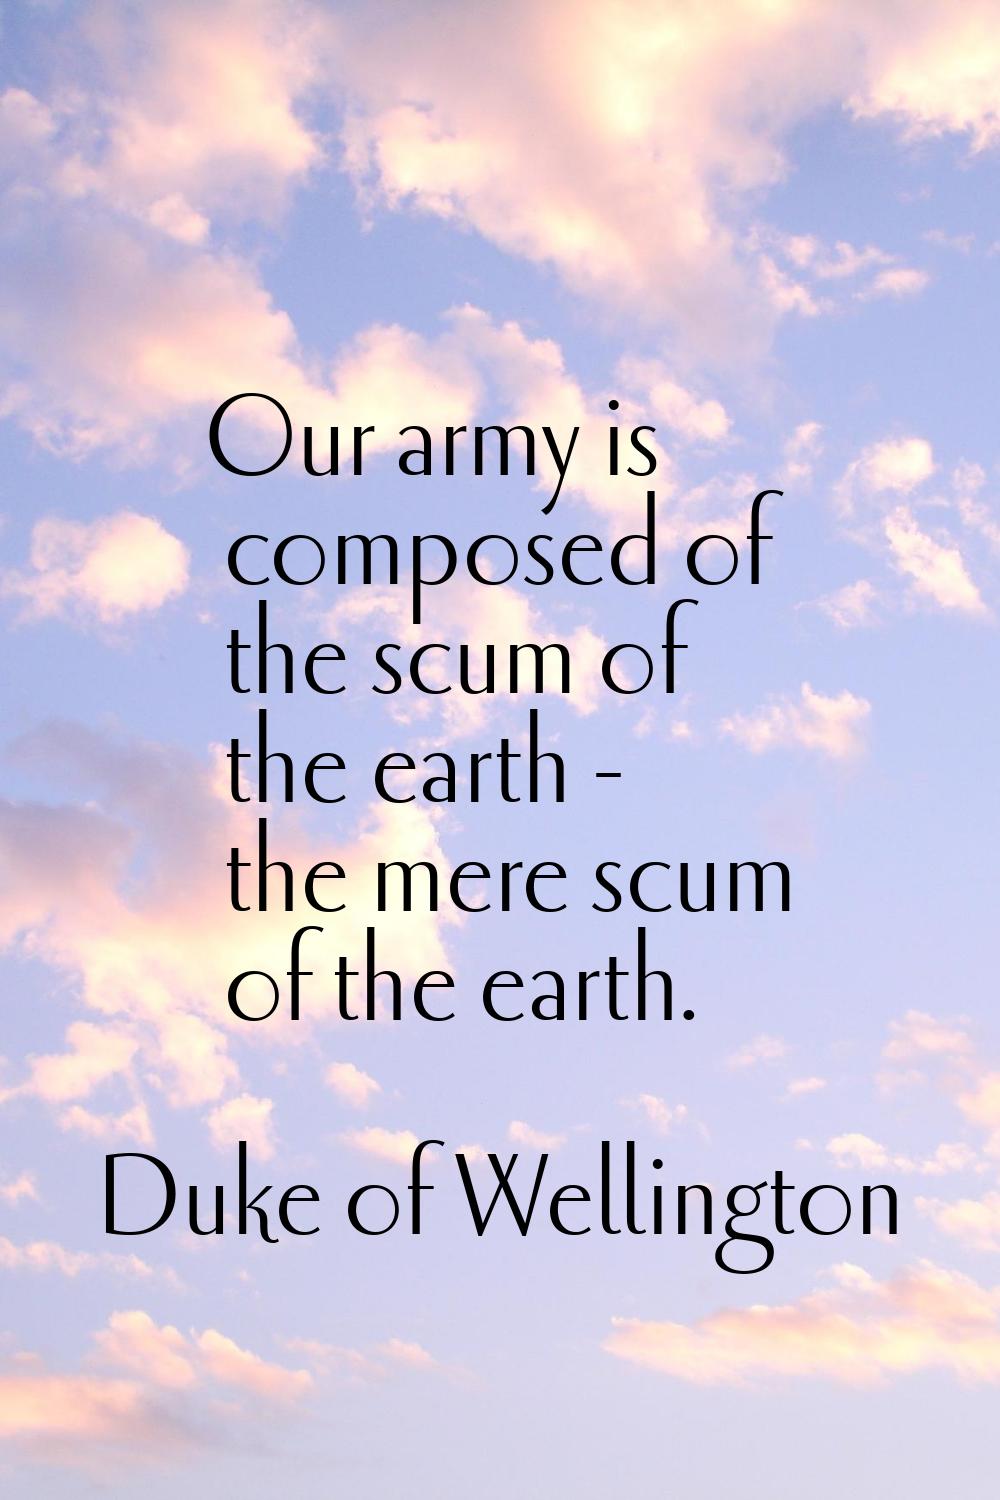 Our army is composed of the scum of the earth - the mere scum of the earth.